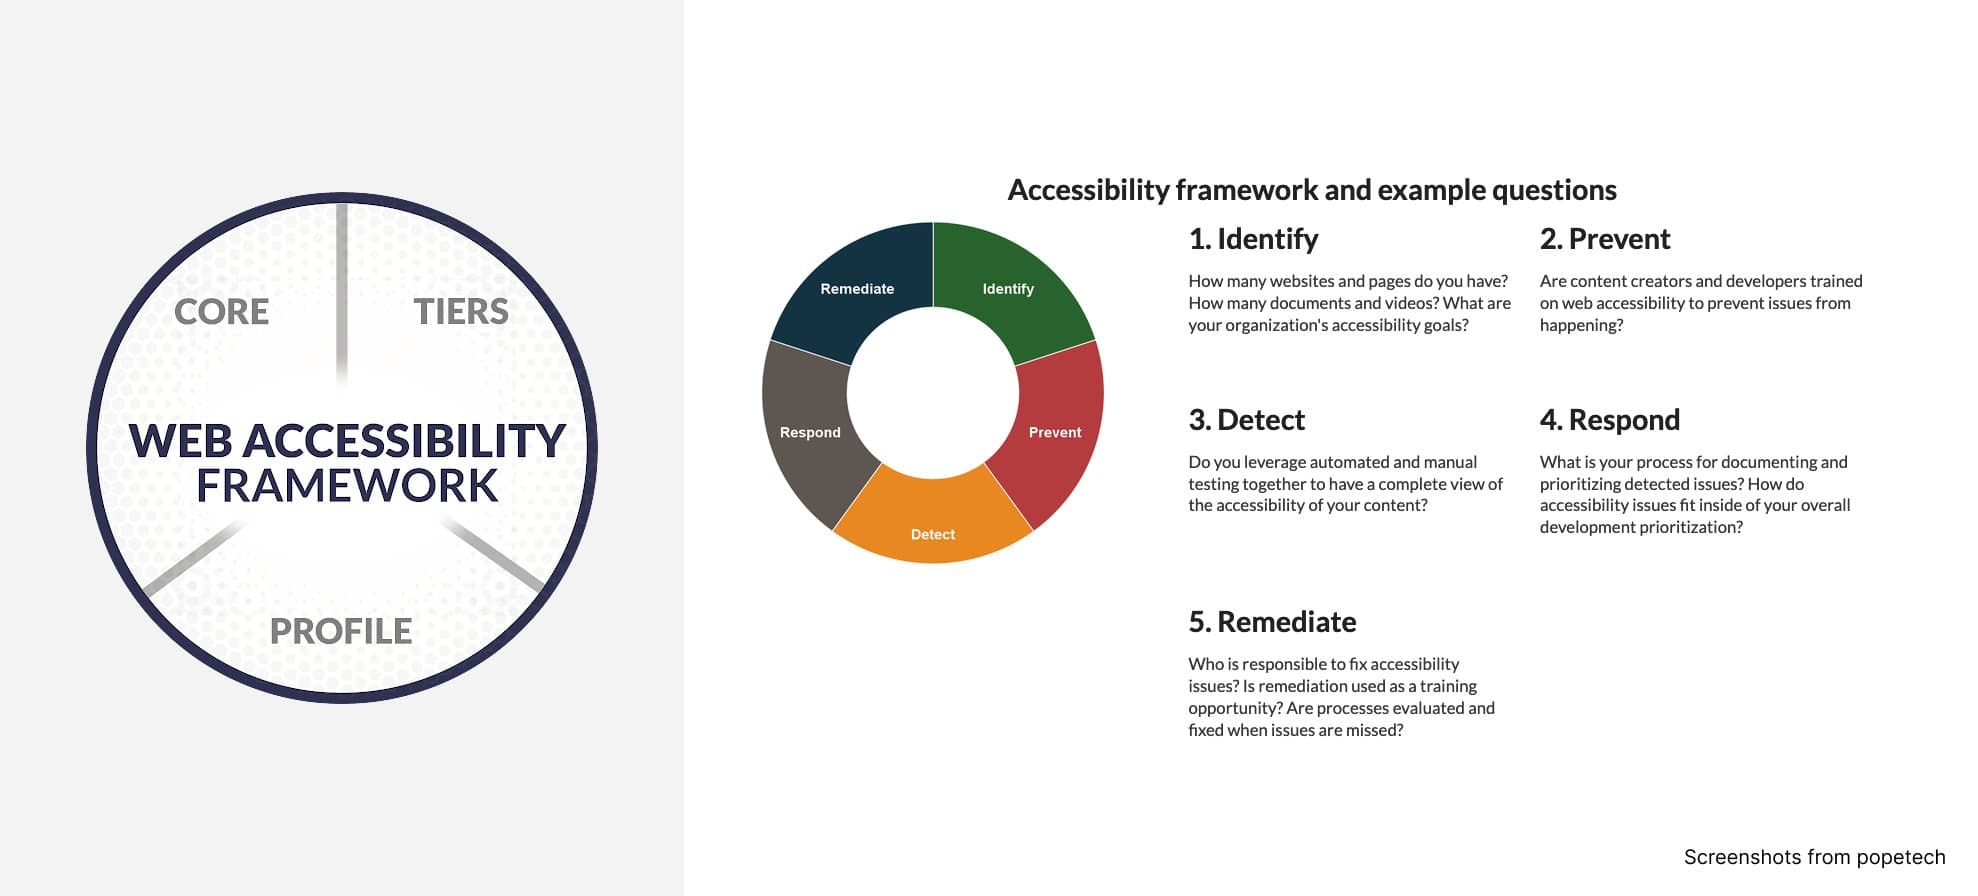 Illustration of the Web Accessibility framework with a circle, split in 3 sections, with the word tiers, profile and core. Screenshot of the core detail: a second illustration with a circle split in 5: Identify (How many websites and pages do you have? How many documents and videos? What are your organization's accessibility goals? ), Prevent ( Are content creators and developers trained on web accessibility to prevent issues from happening? ), Detect ( Do you leverage automated and manual testing together to have a complete view of the accessibility of your content? ), Respond ( What is your process for documenting and prioritizing detected issues? How do accessibility issues fit inside of your overall development prioritization? ), Remediate ( Who is responsible to fix accessibility issues? Is remediation used as a training opportunity? Are processes evaluated and fixed when issues are missed? )